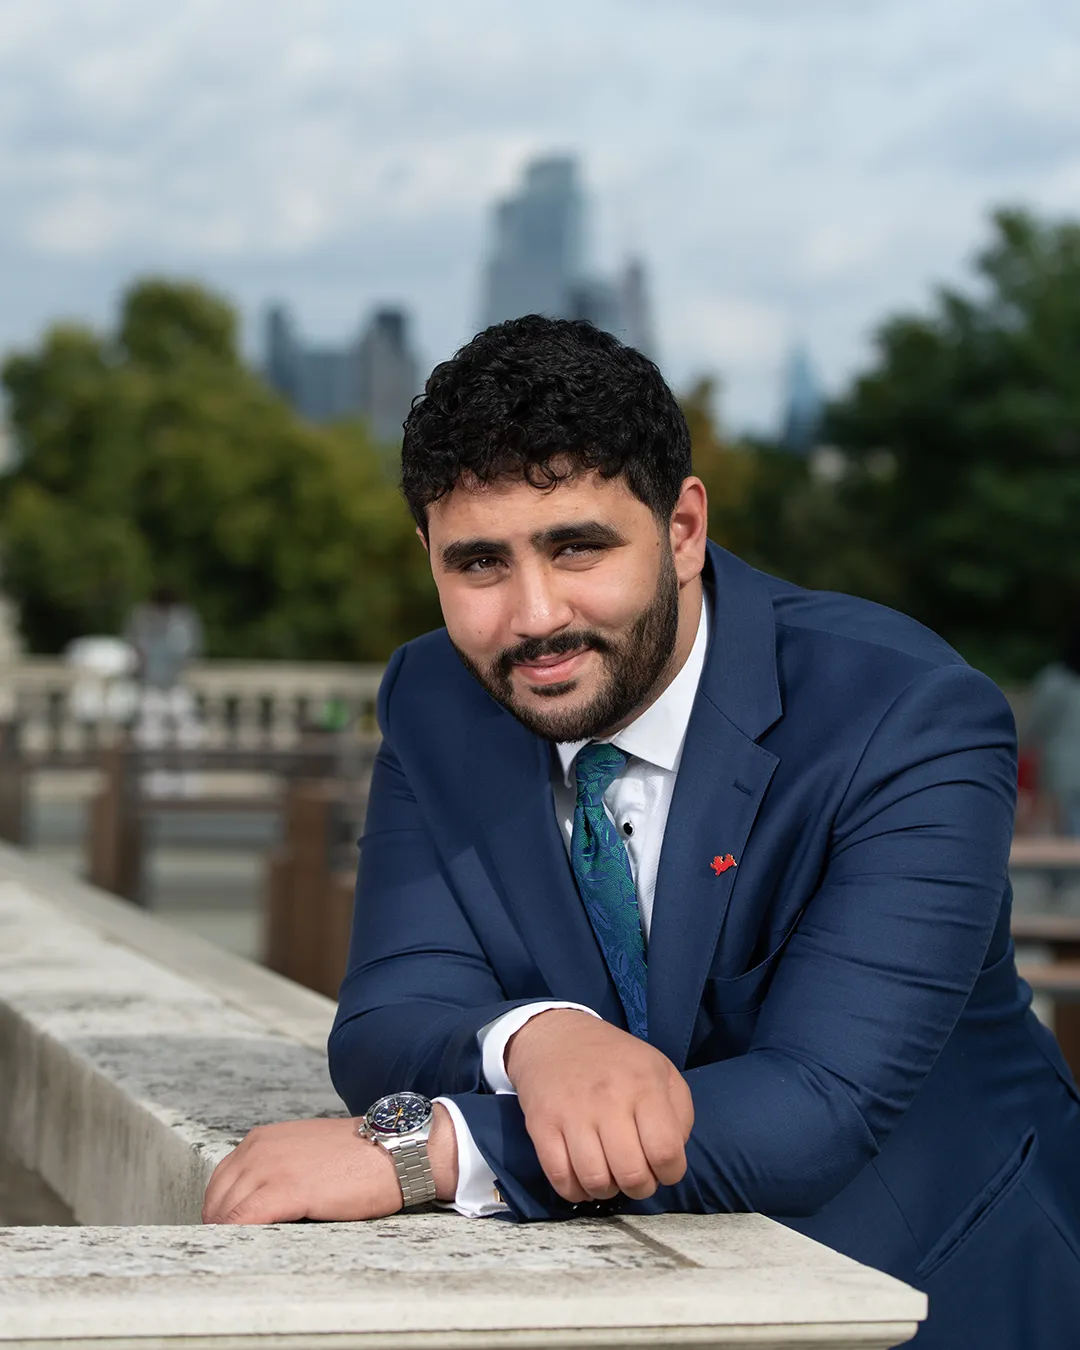 Mohamed Elhag stands and rests his arms on a white marble plinth with the London skyline behind him. He is dressed in a blue navy suit.